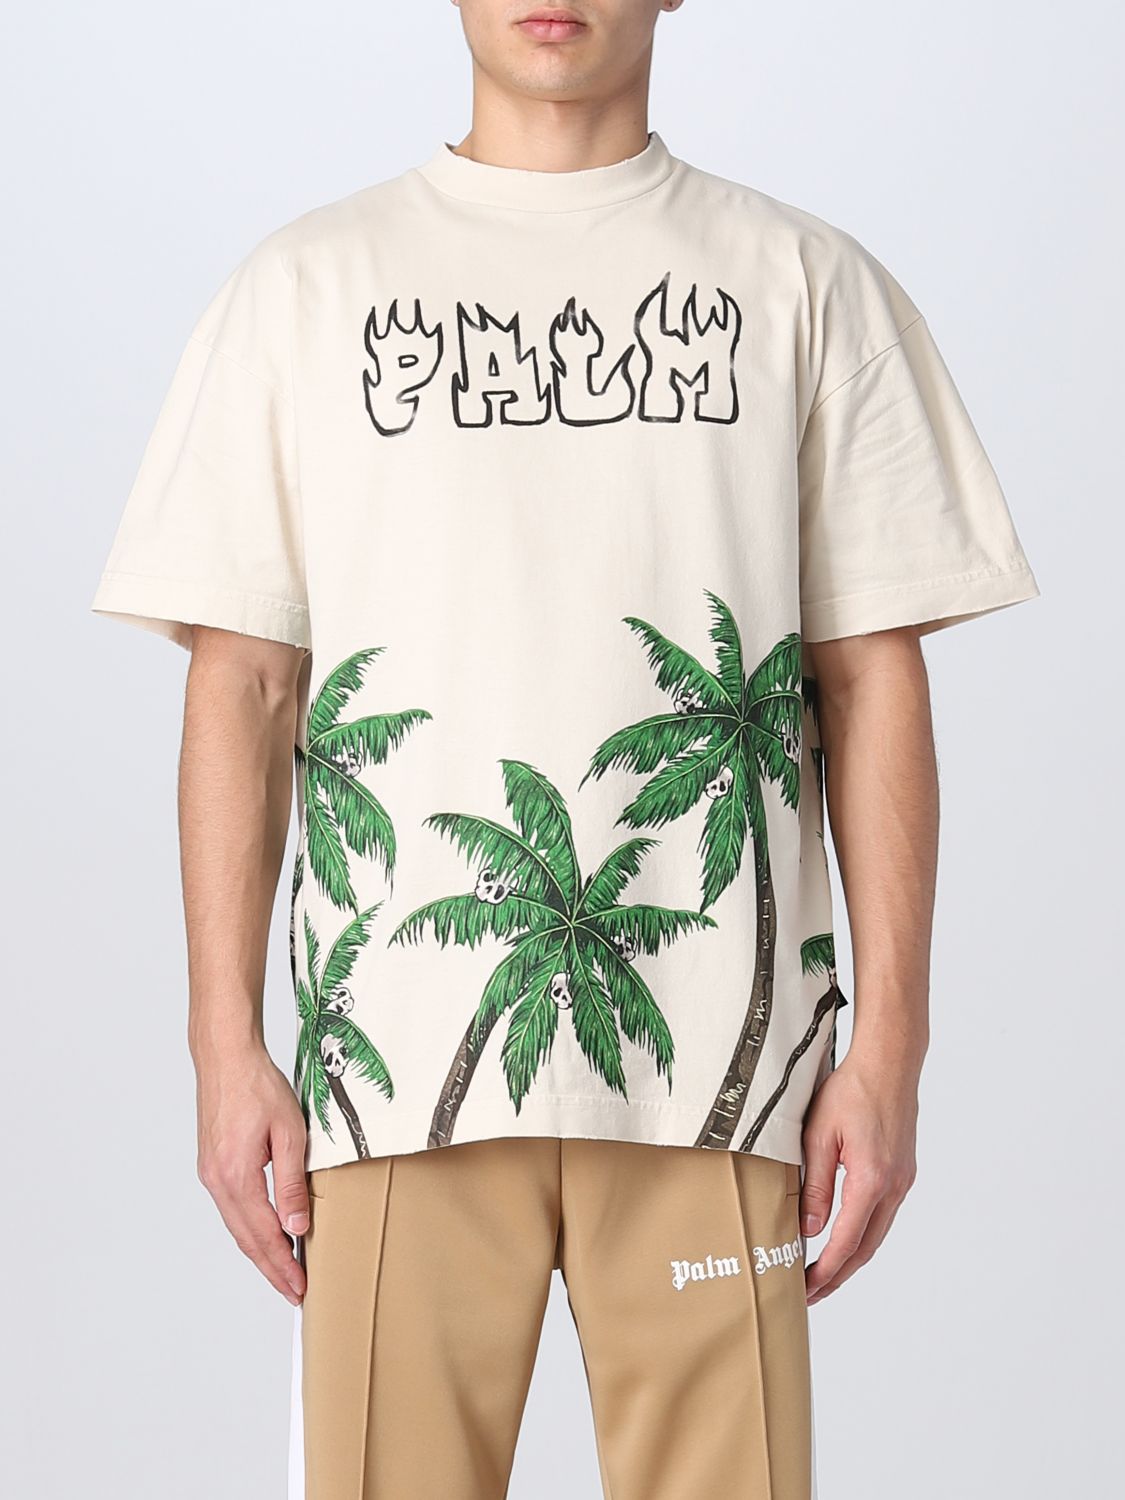 PALM ANGELS: t-shirt for man